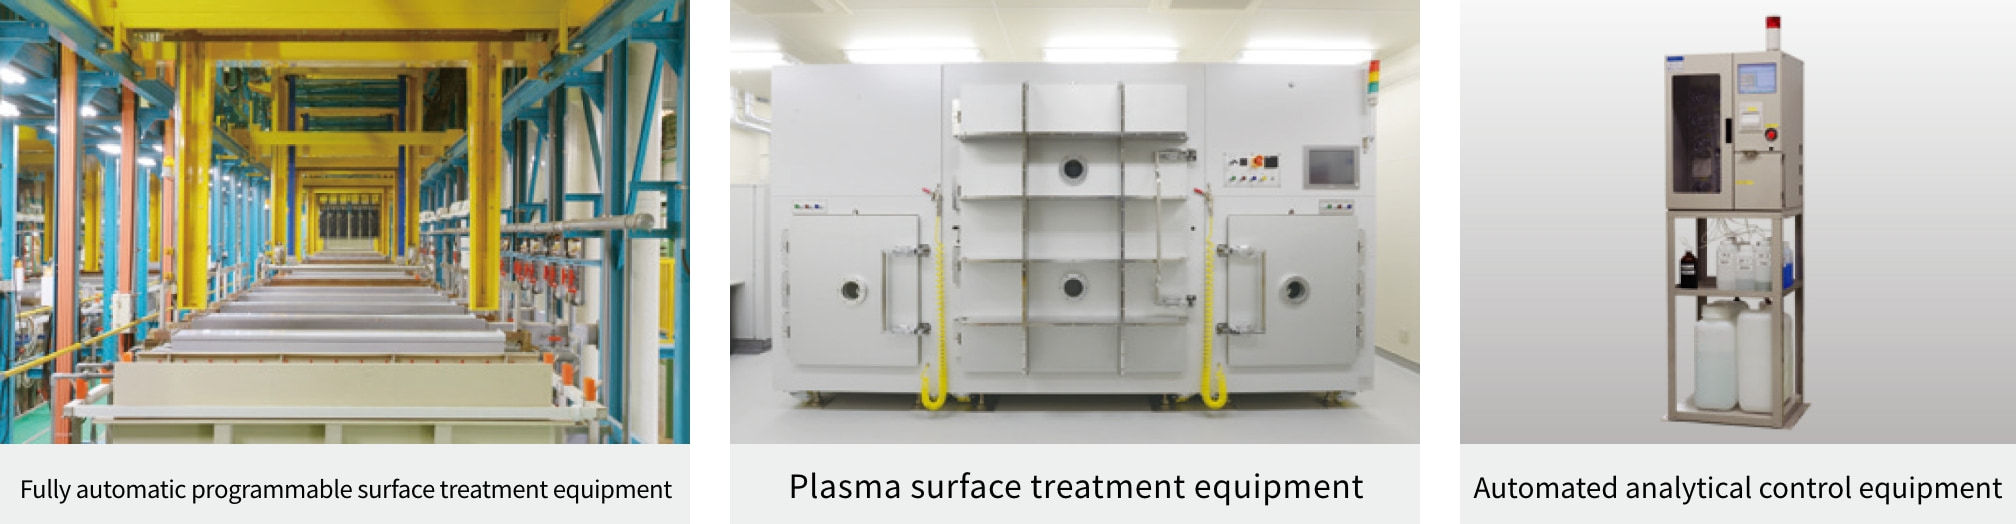 Fully automatic programmable surface treatment equipment Plasma surface treatment equipment Automated analytical control equipment